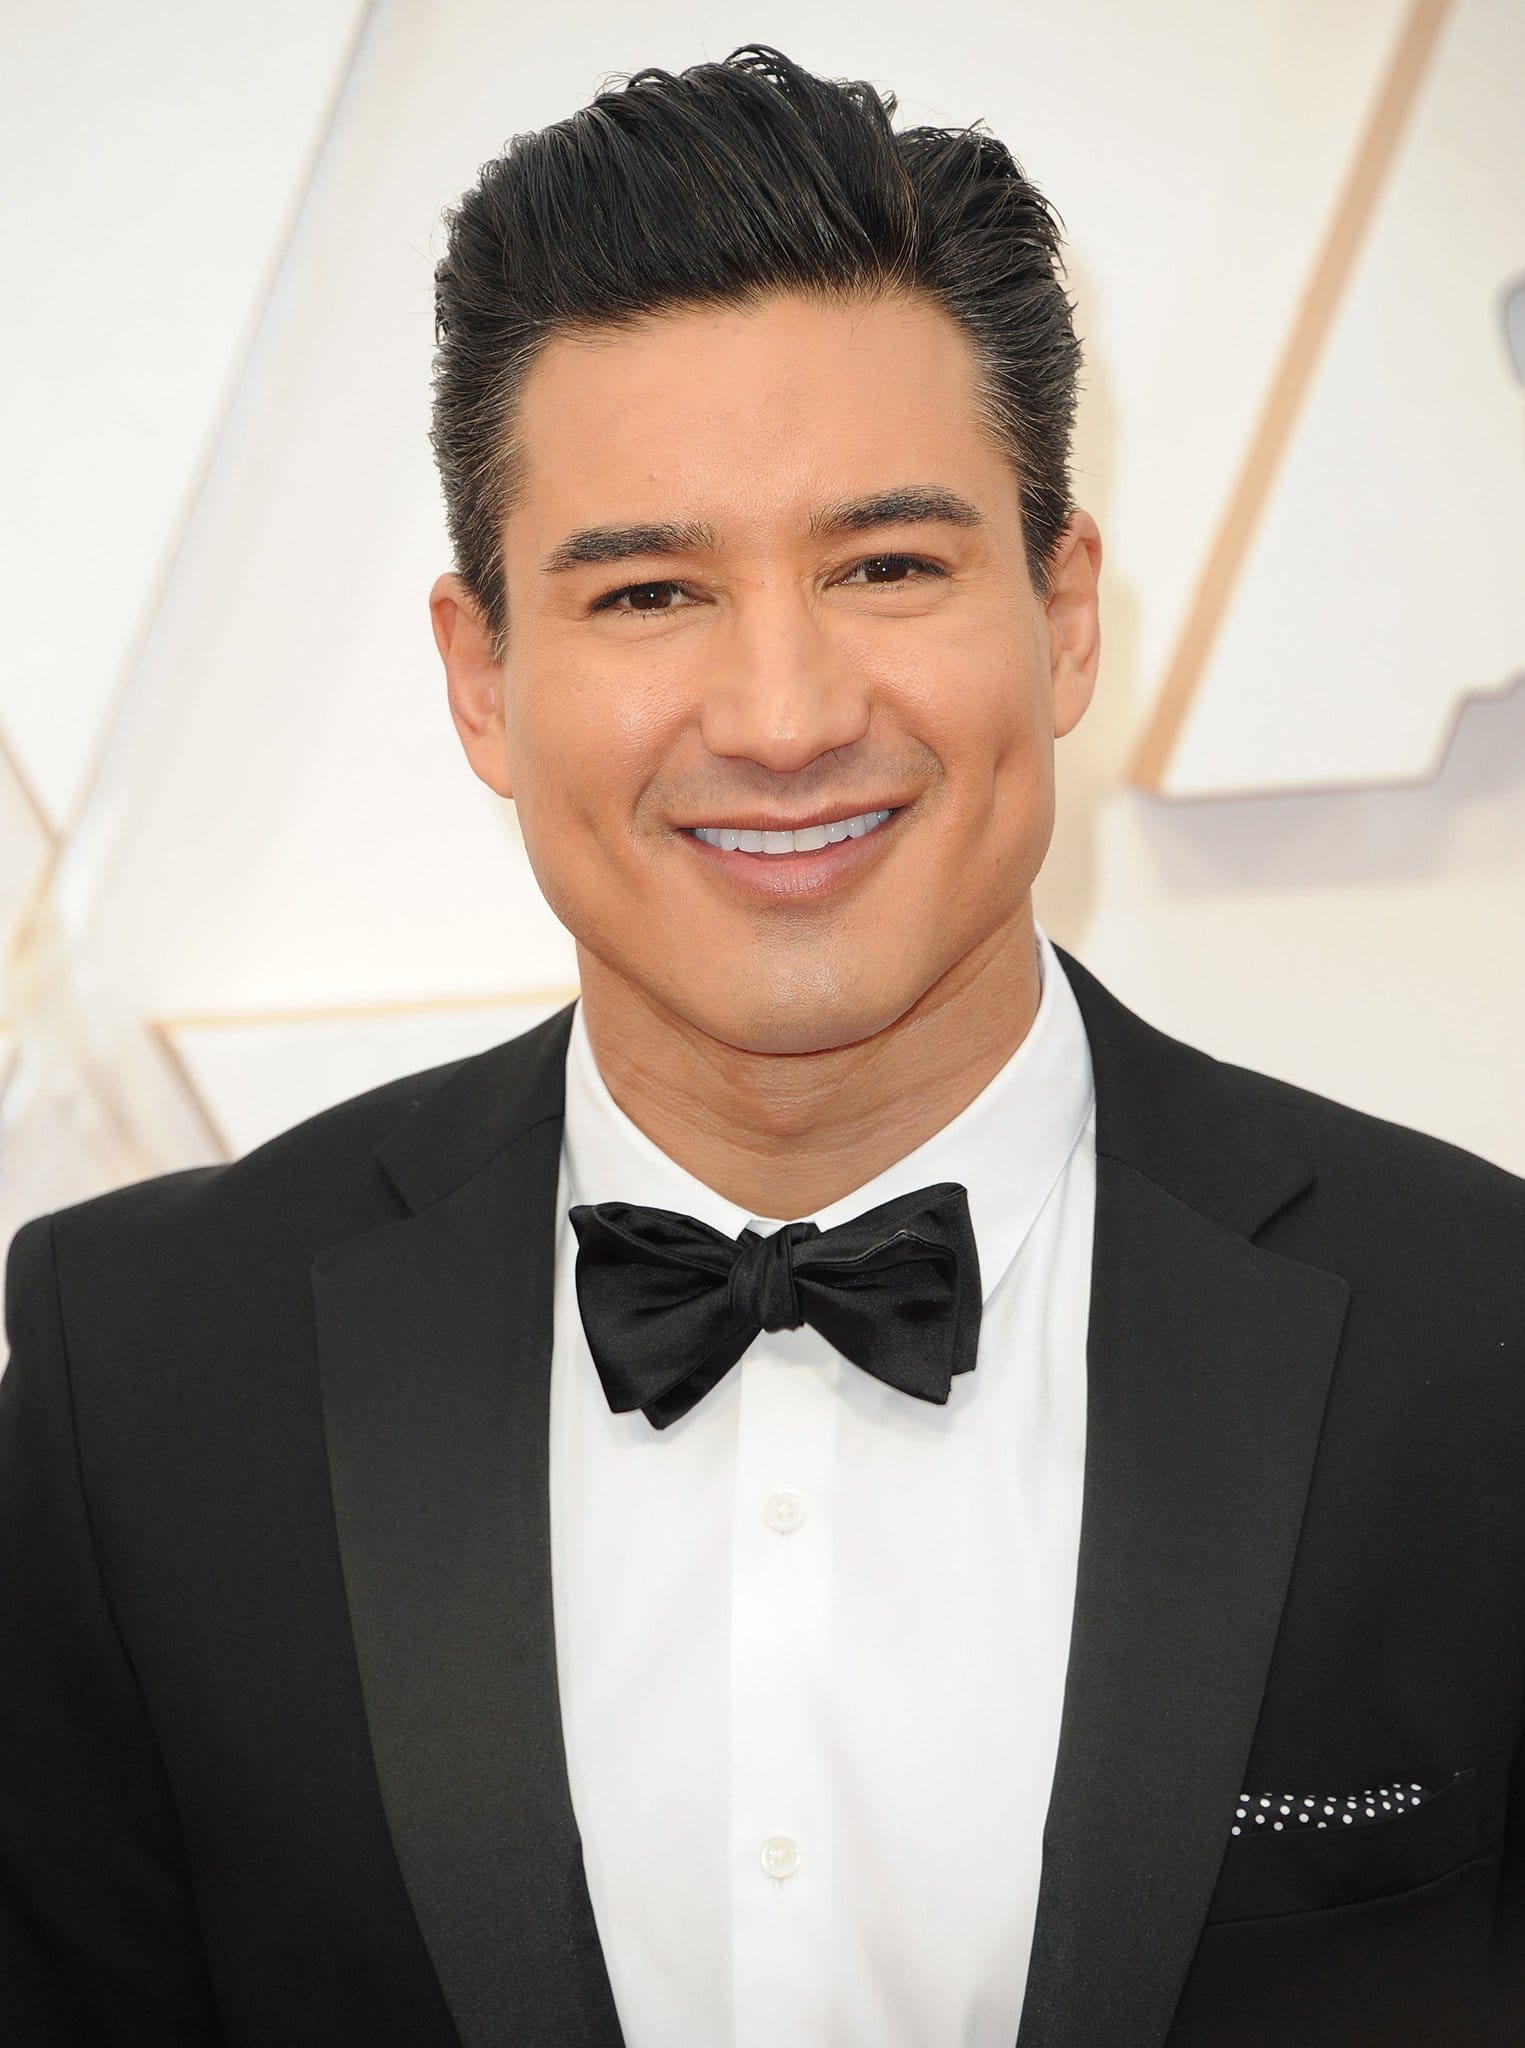 Mario Lopez is a two-time Emmy Award-winning TV host with an estimated net worth of $25 million